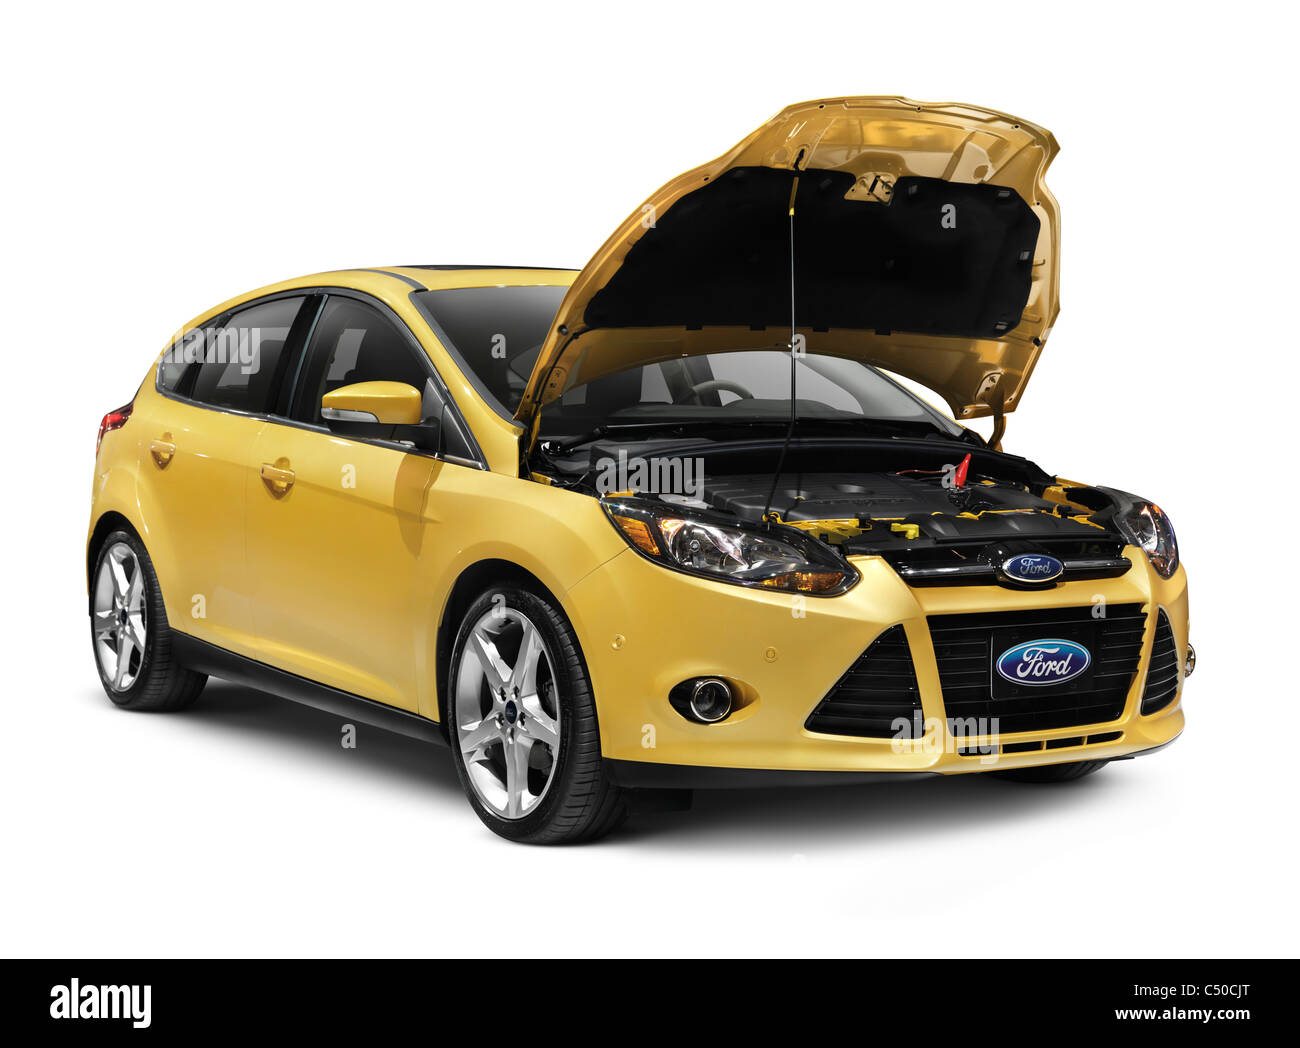 Car With Open Bonnet : Yellow 2012 Ford Focus. Car with open hood Ford Focus Flat Battery Can't Open Bonnet